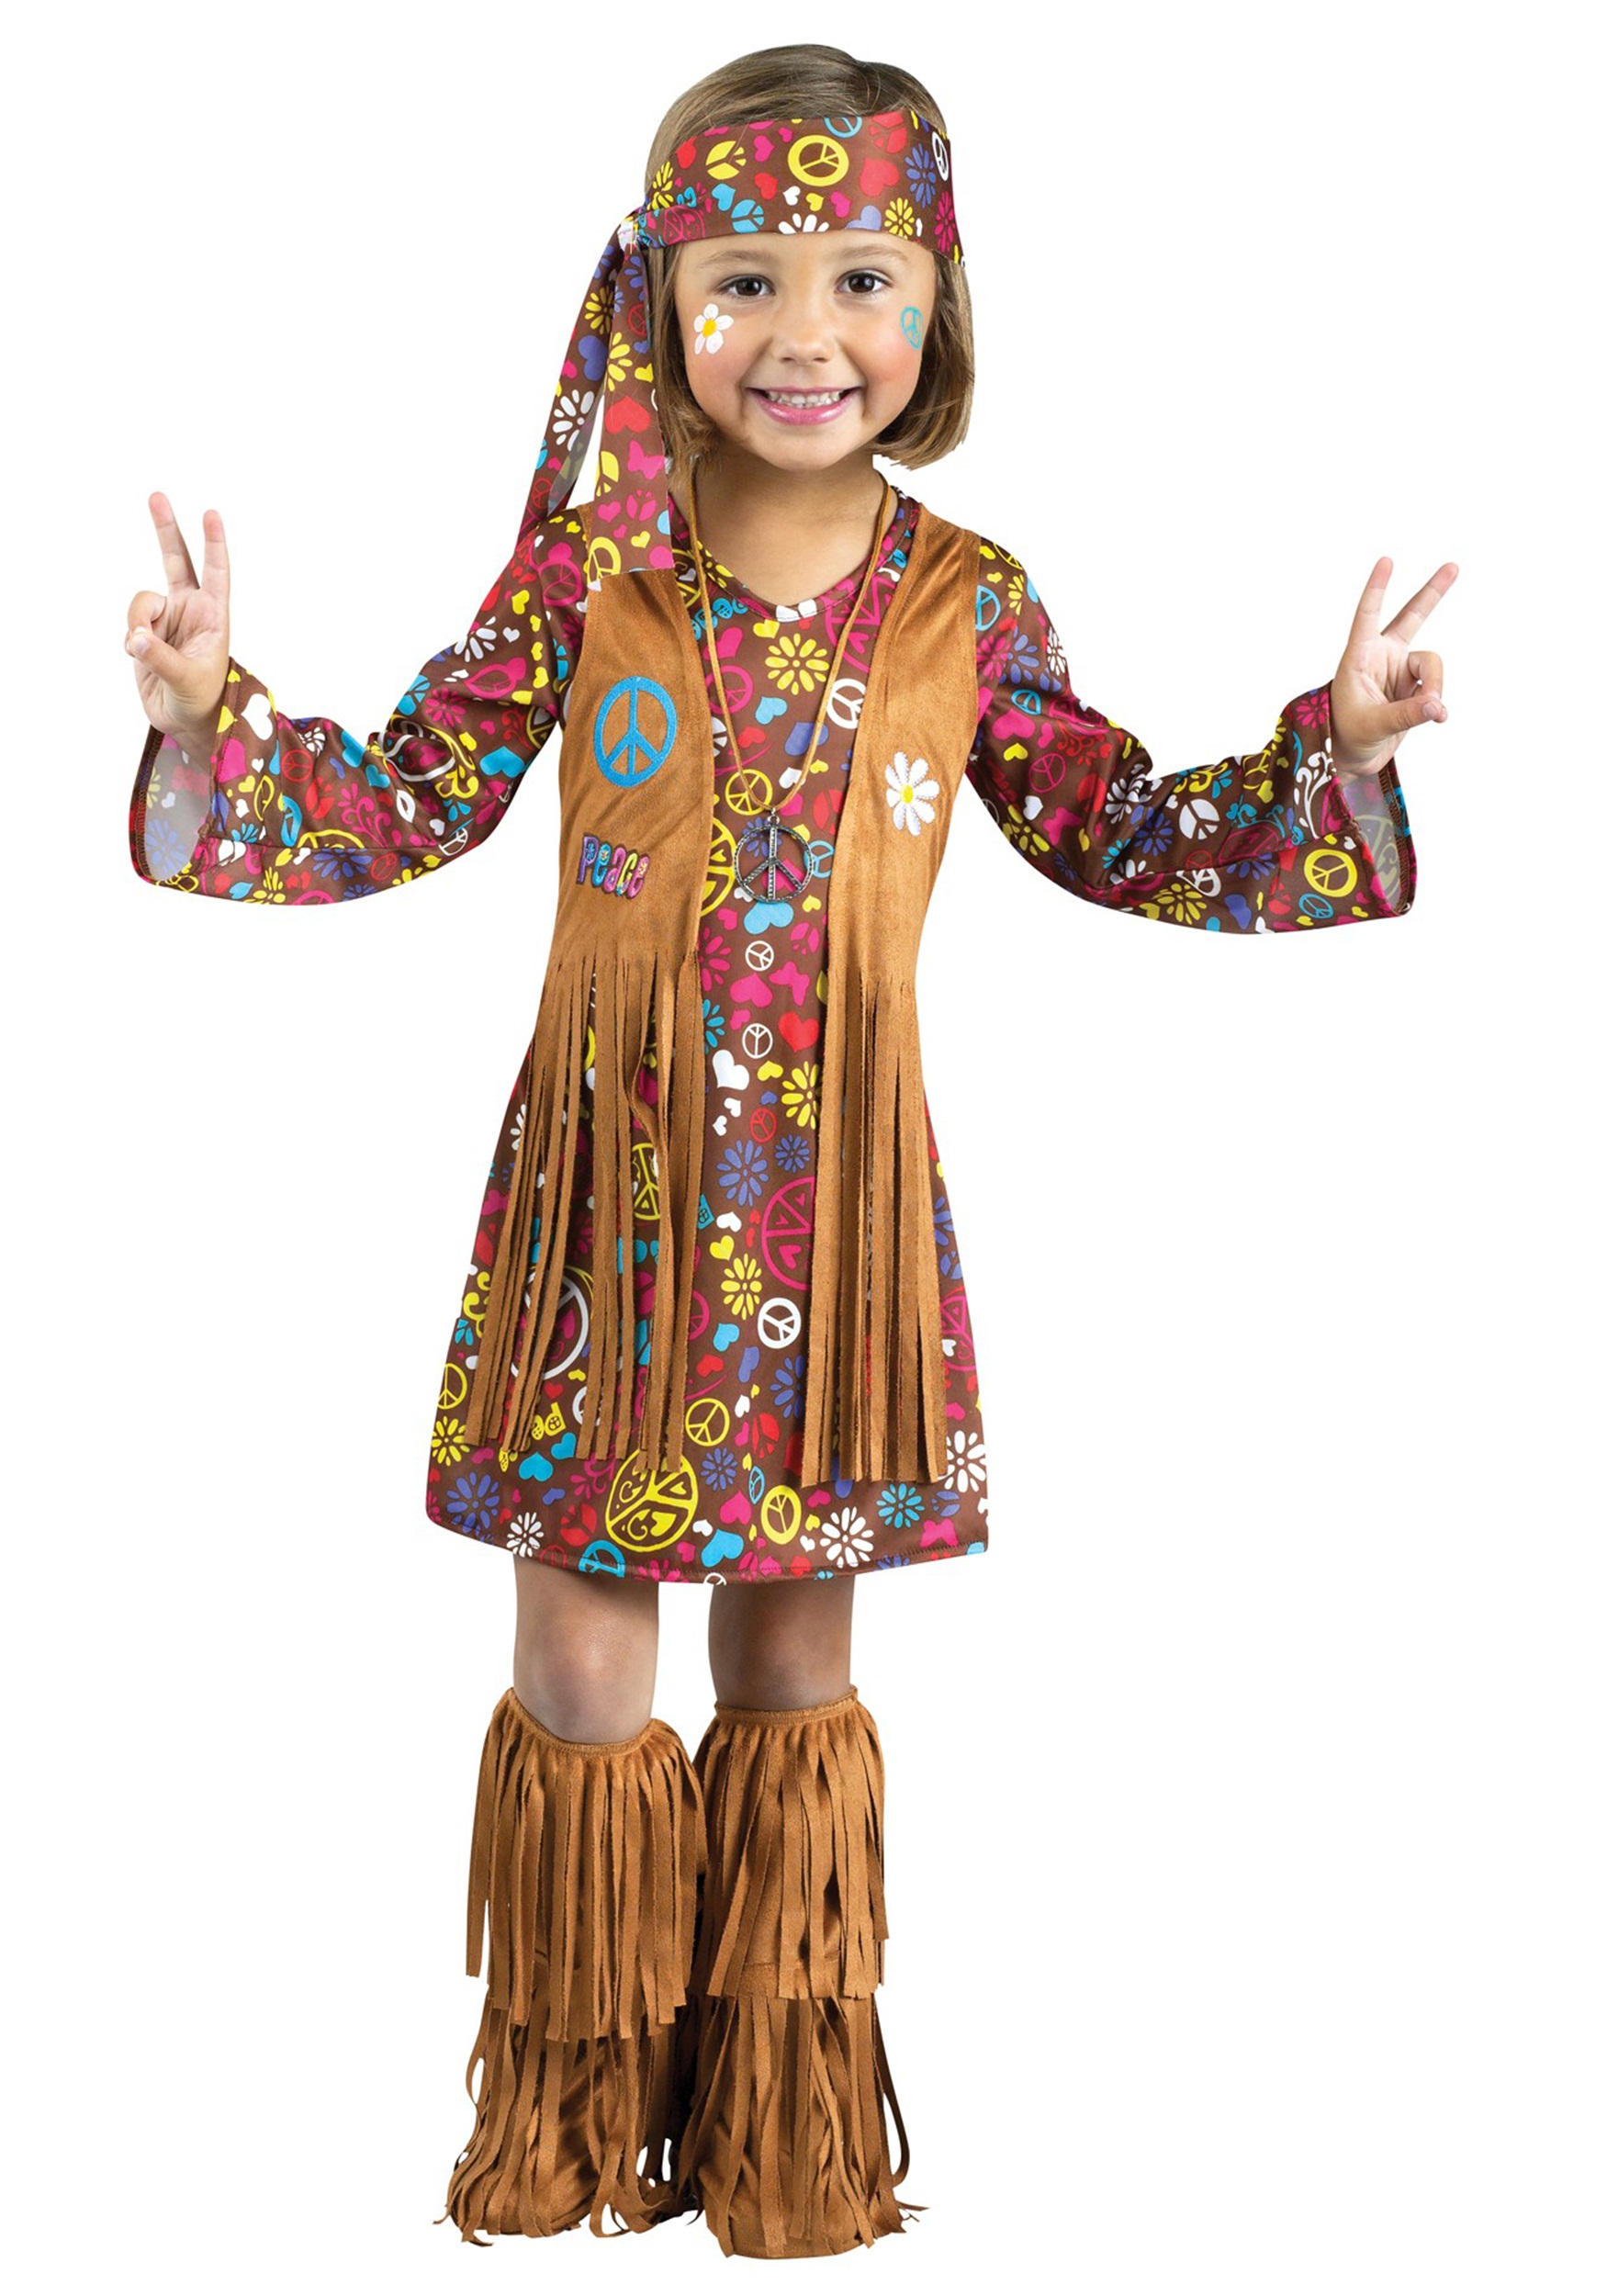 Toddler Peace & Love Hippie Costume for Girls